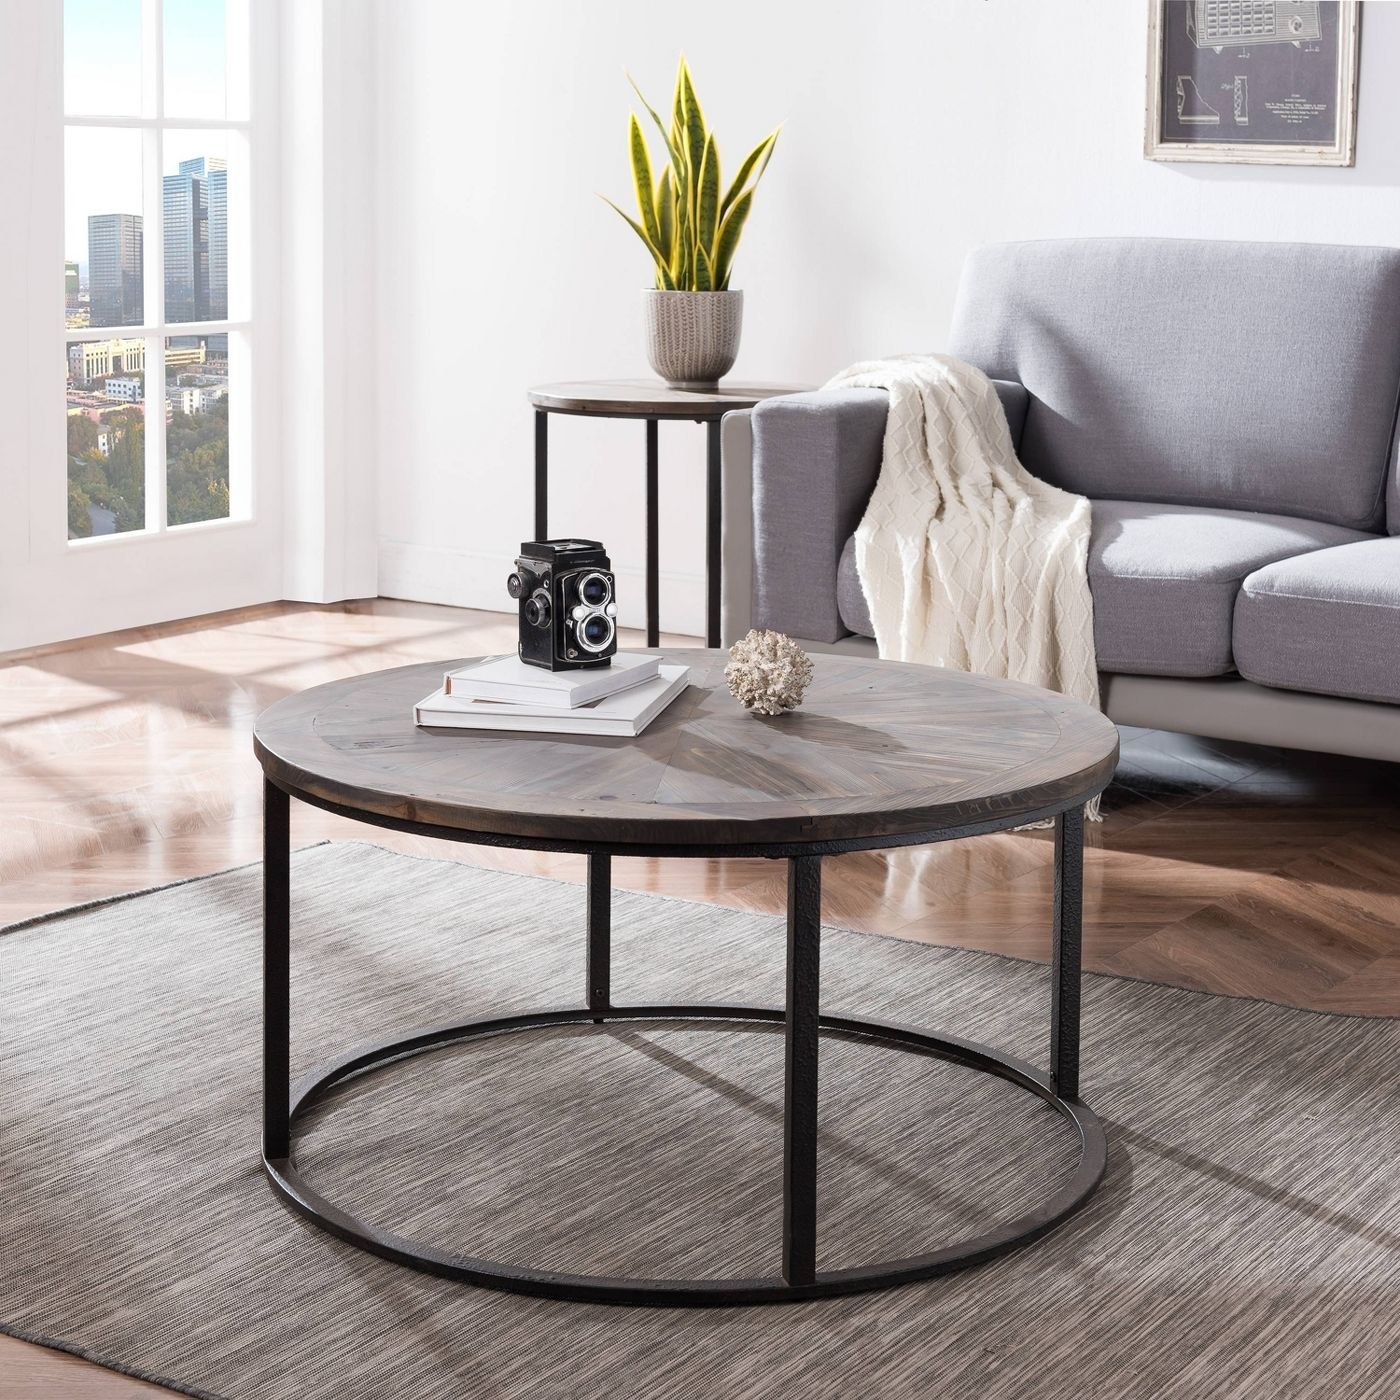 The table with a natural round top and black metal base.